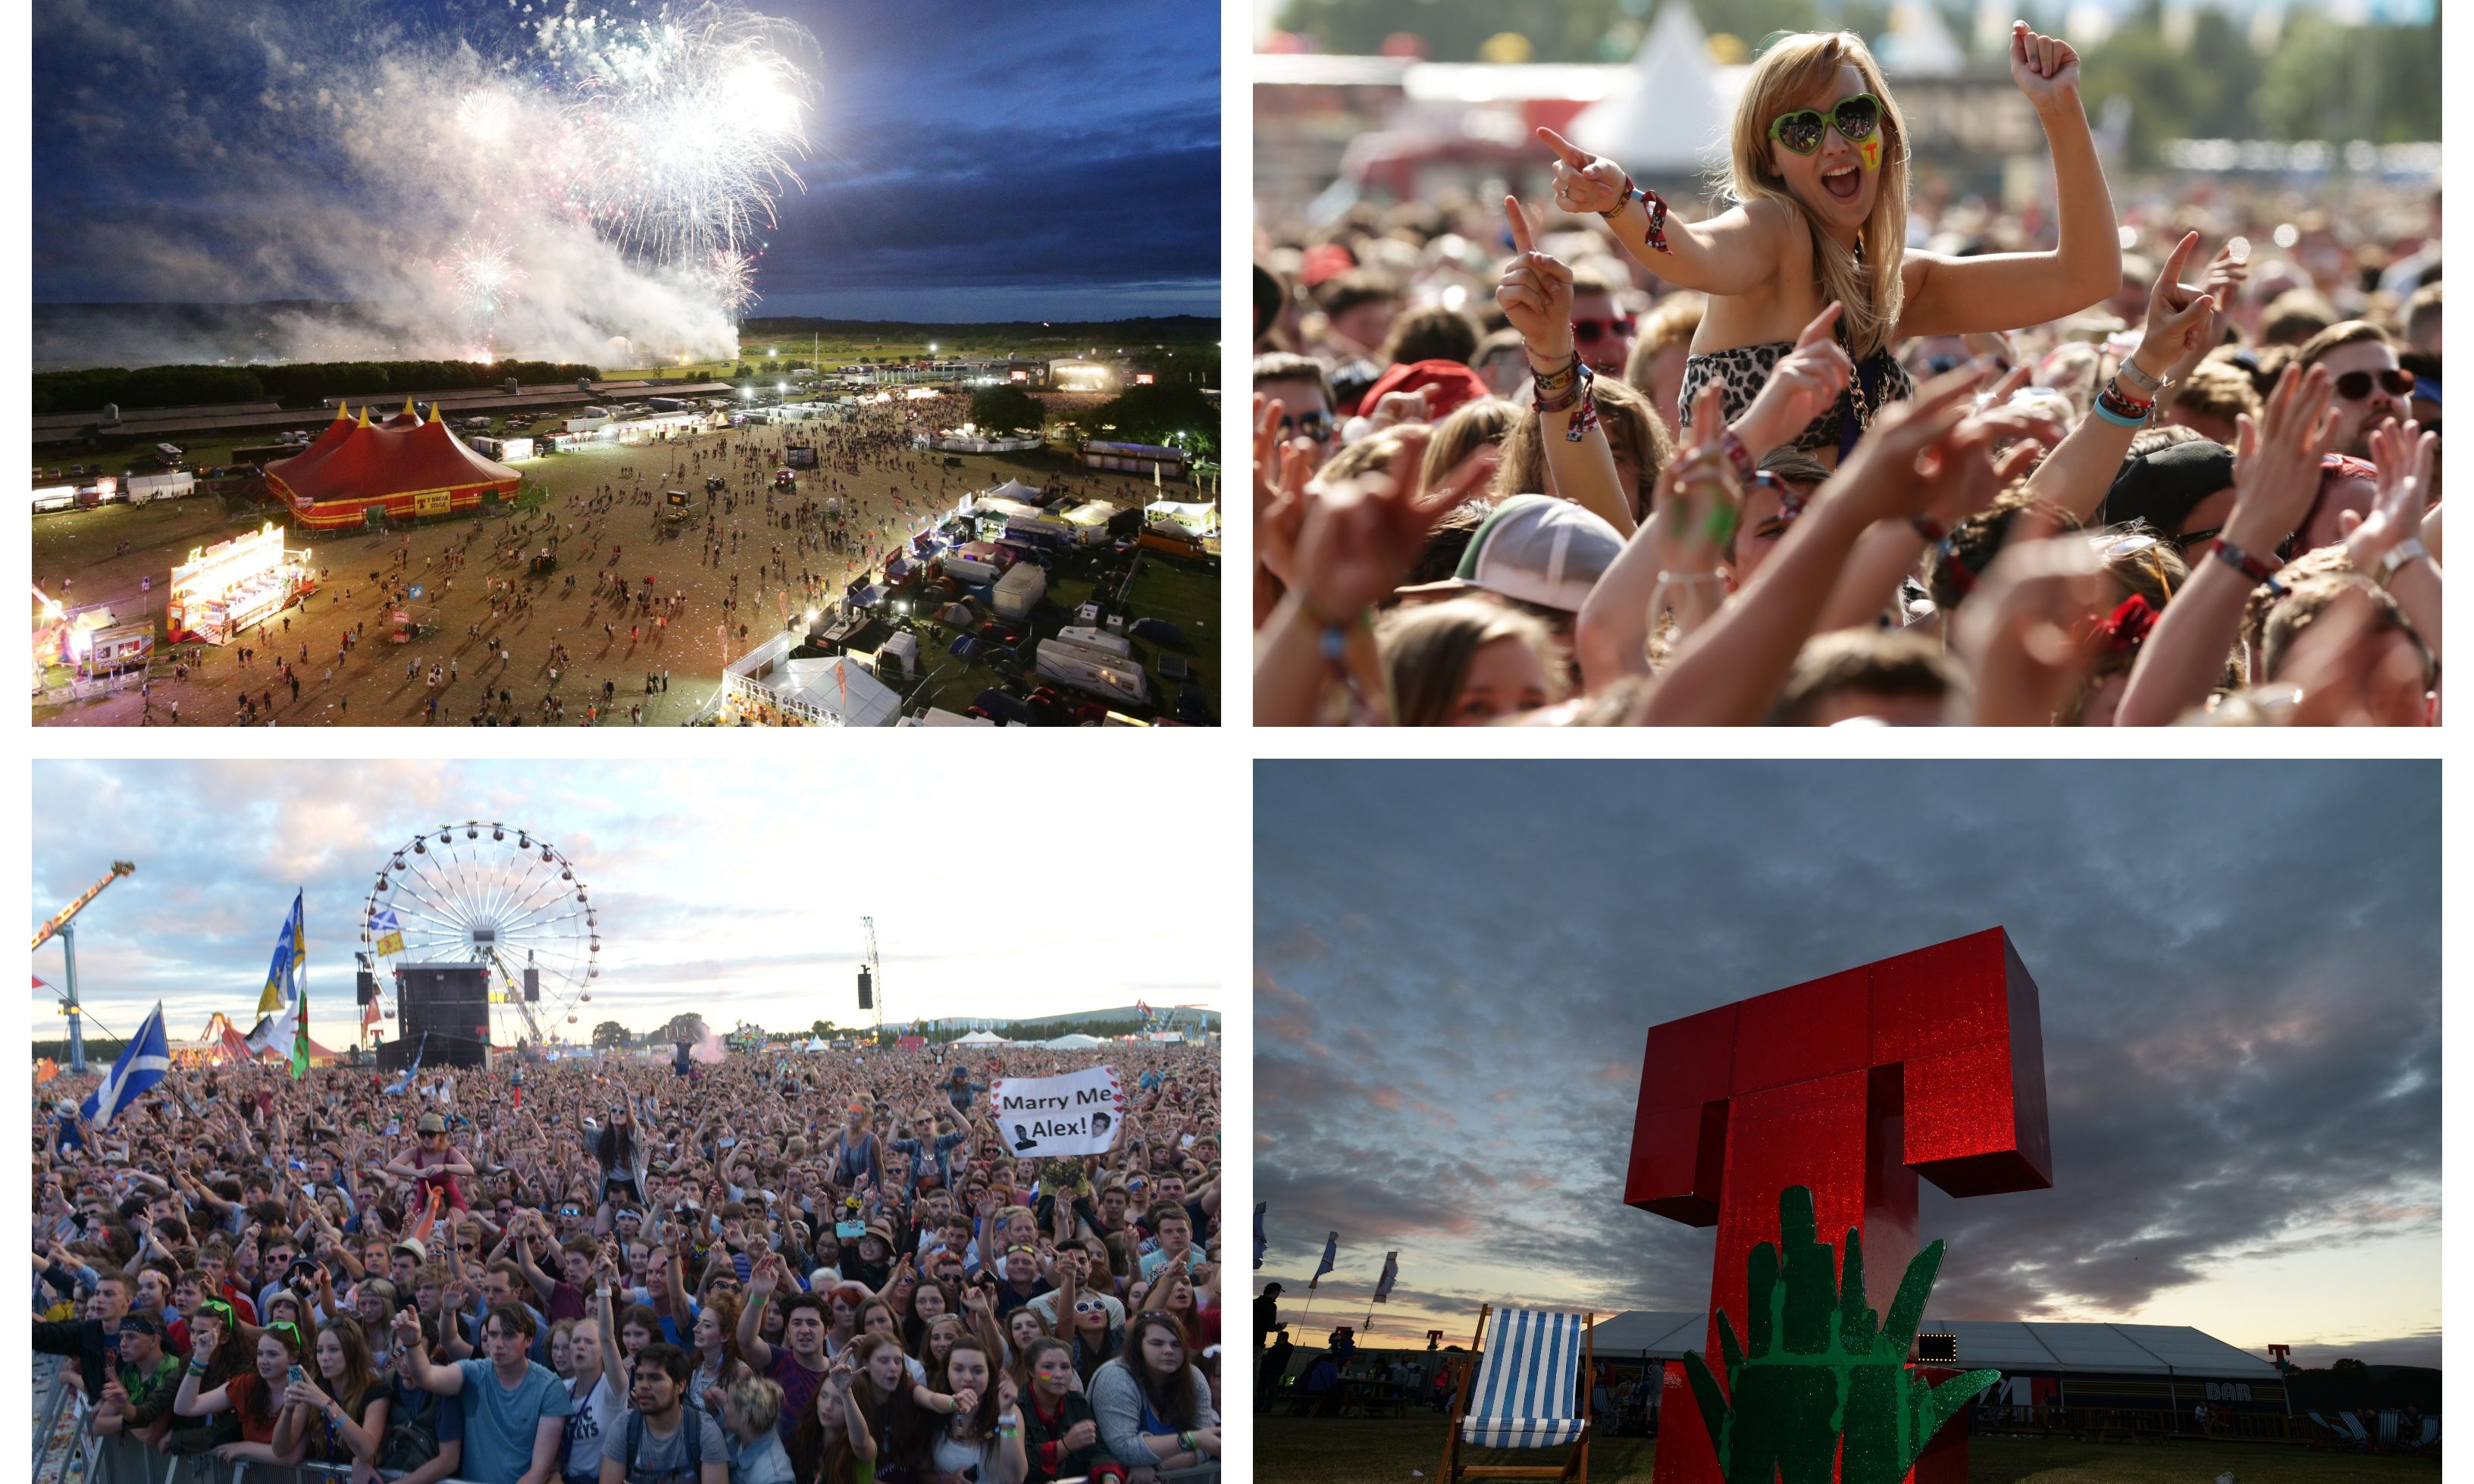 T in the Park was one of the UK's biggest music festivals.